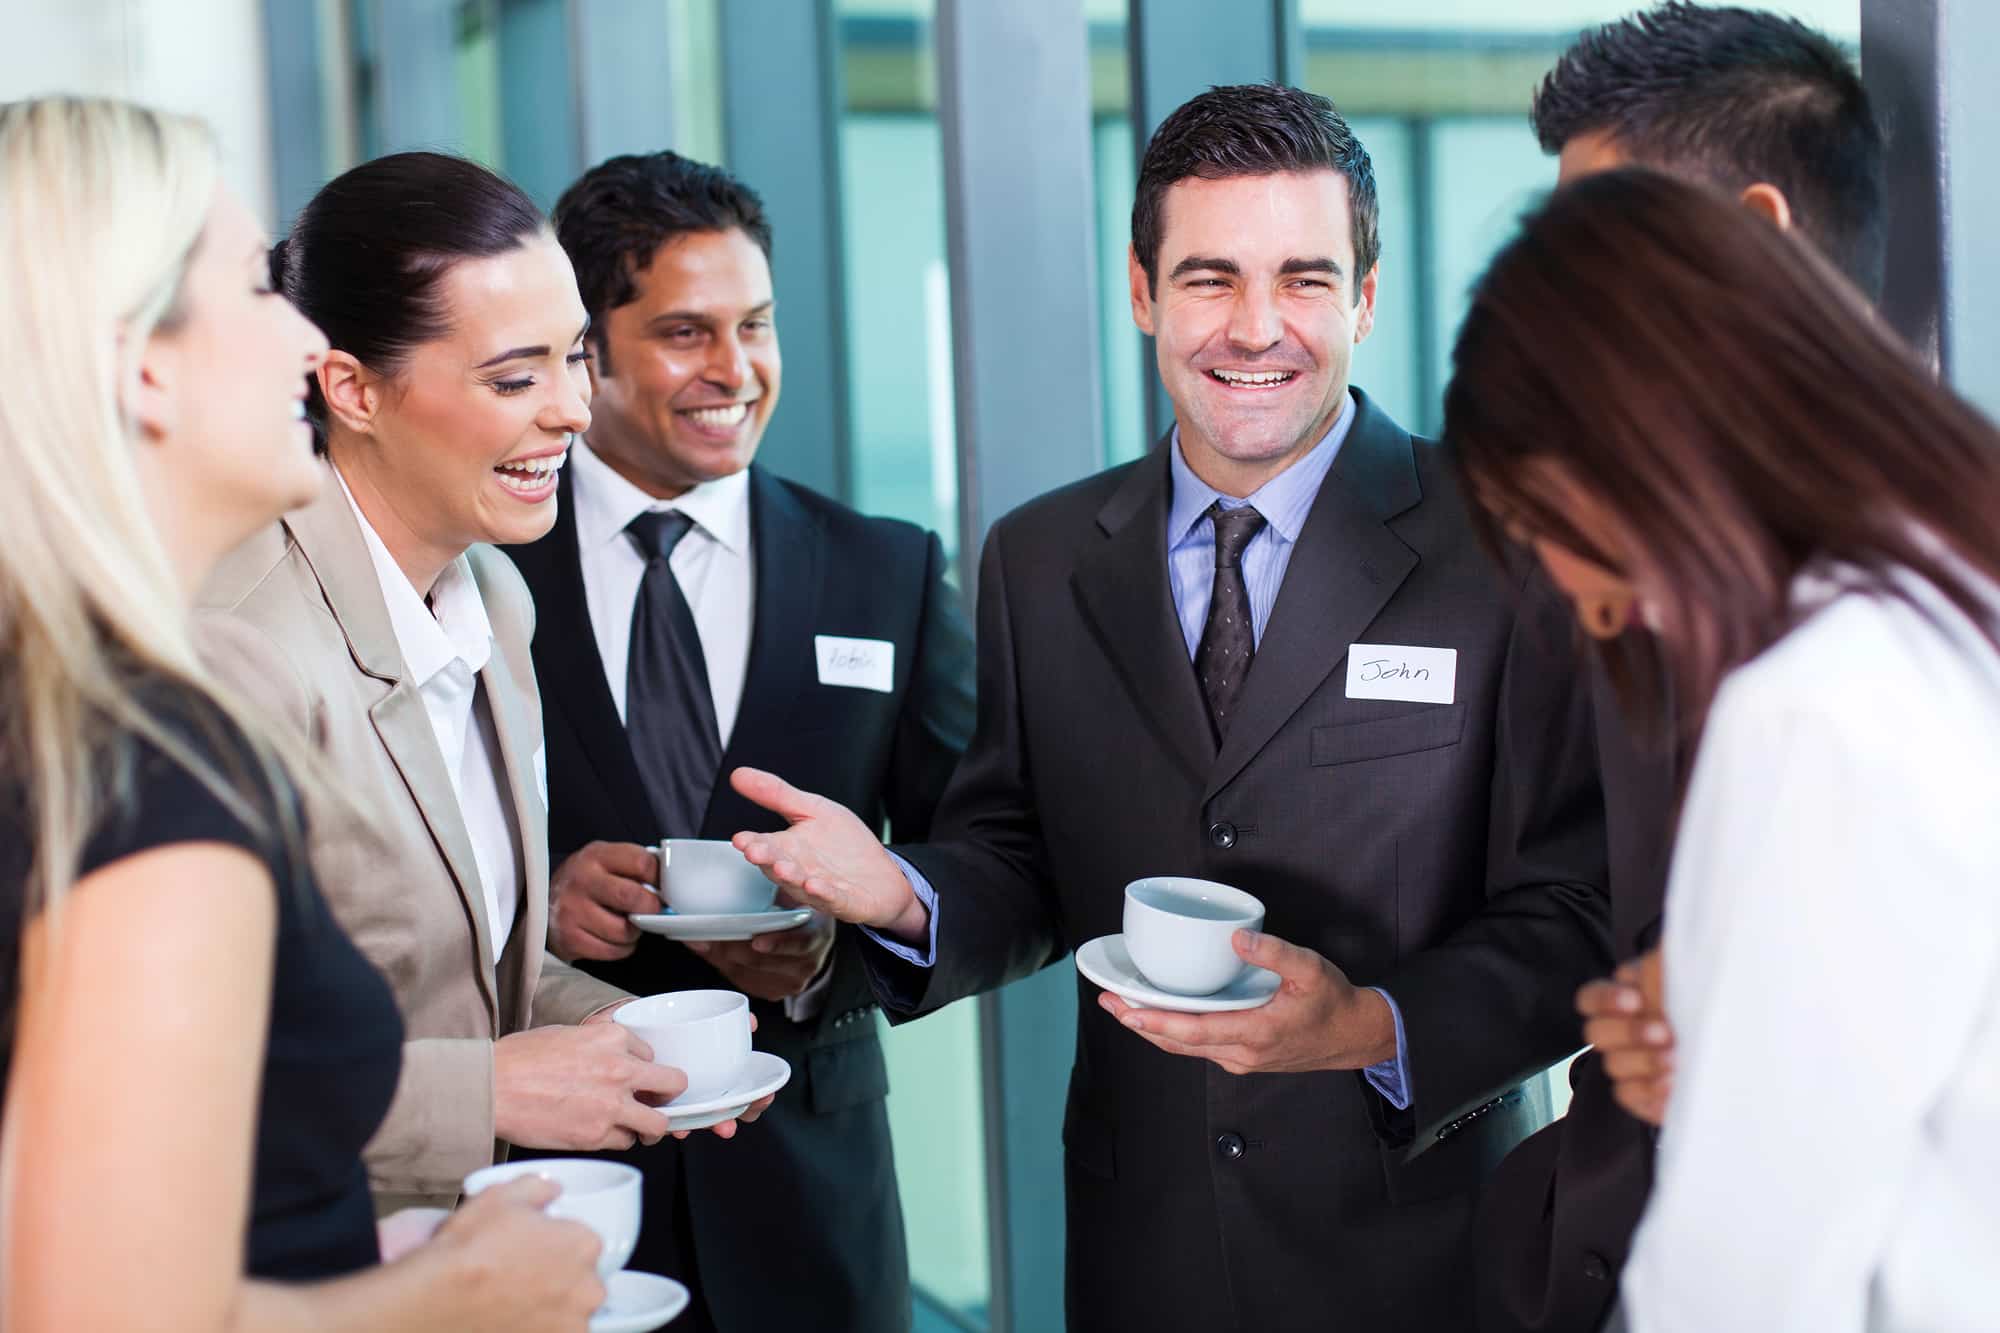 How is networking important in the growth of any business and how can we practice it